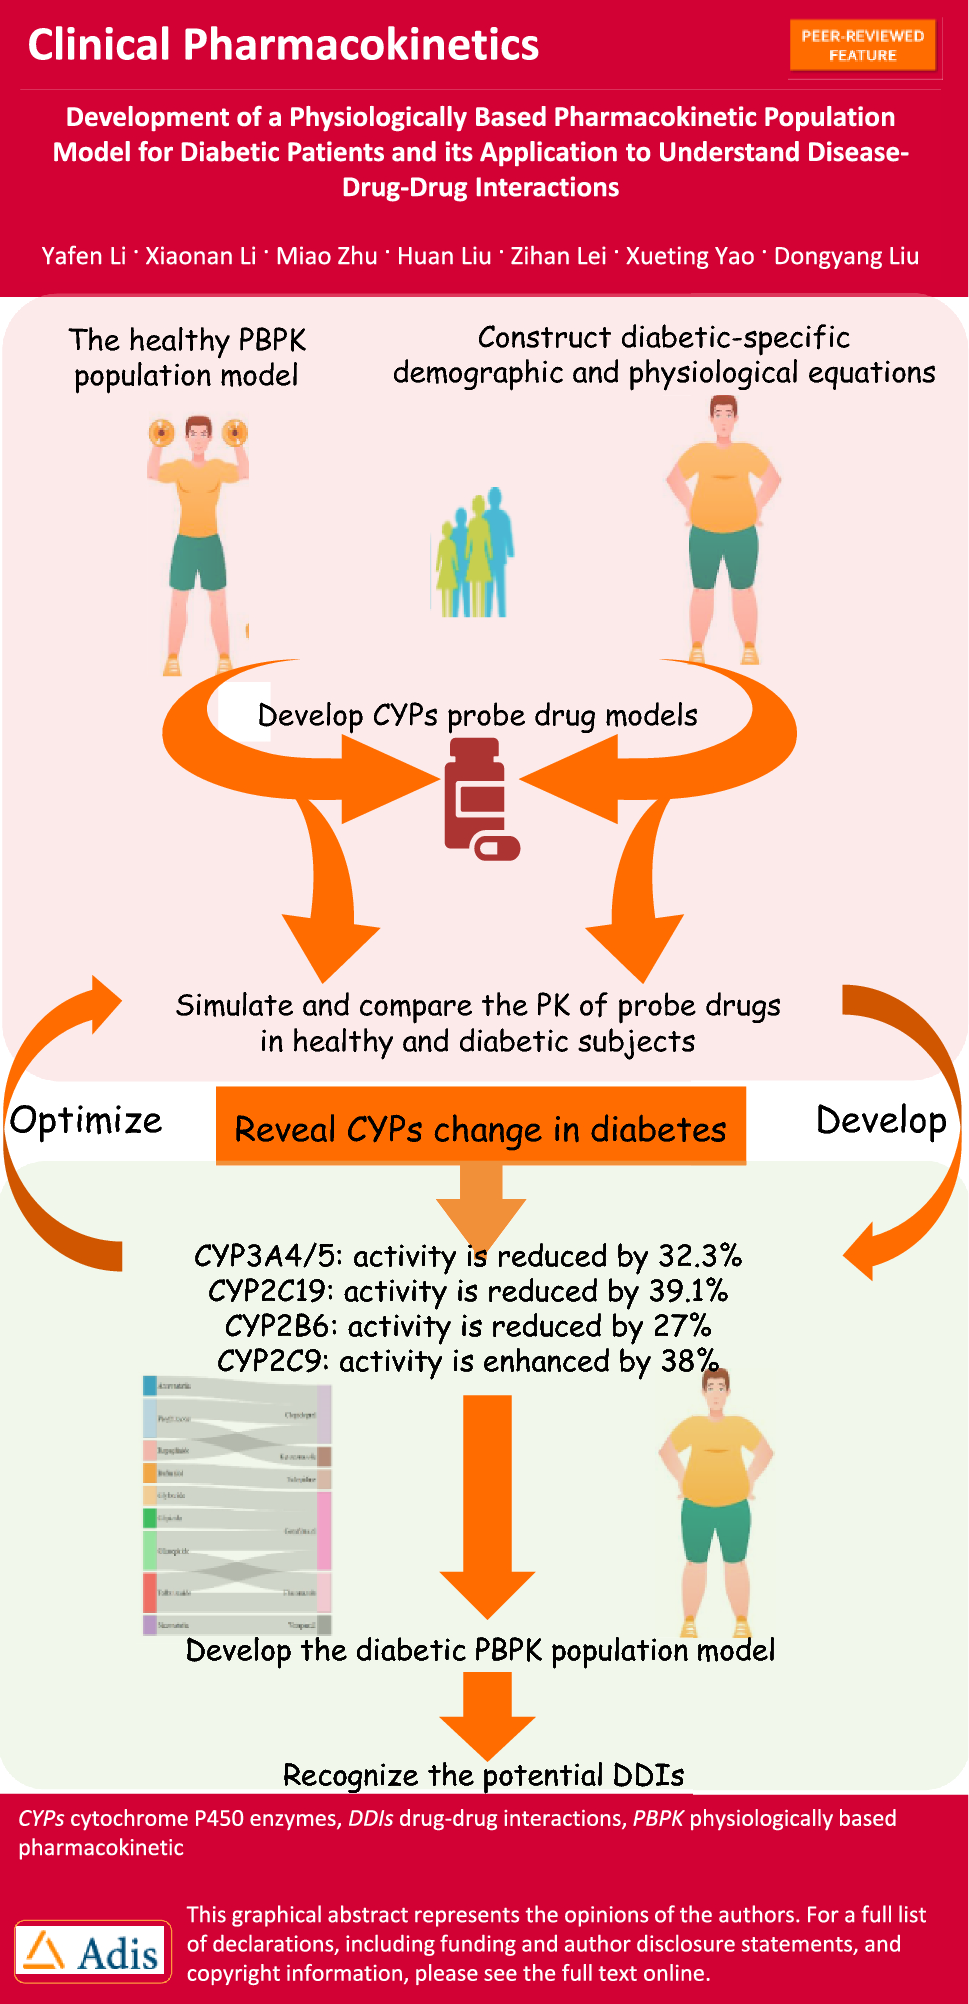 Development of a Physiologically Based Pharmacokinetic Population Model for Diabetic Patients and its Application to Understand Disease-drug–drug Interactions